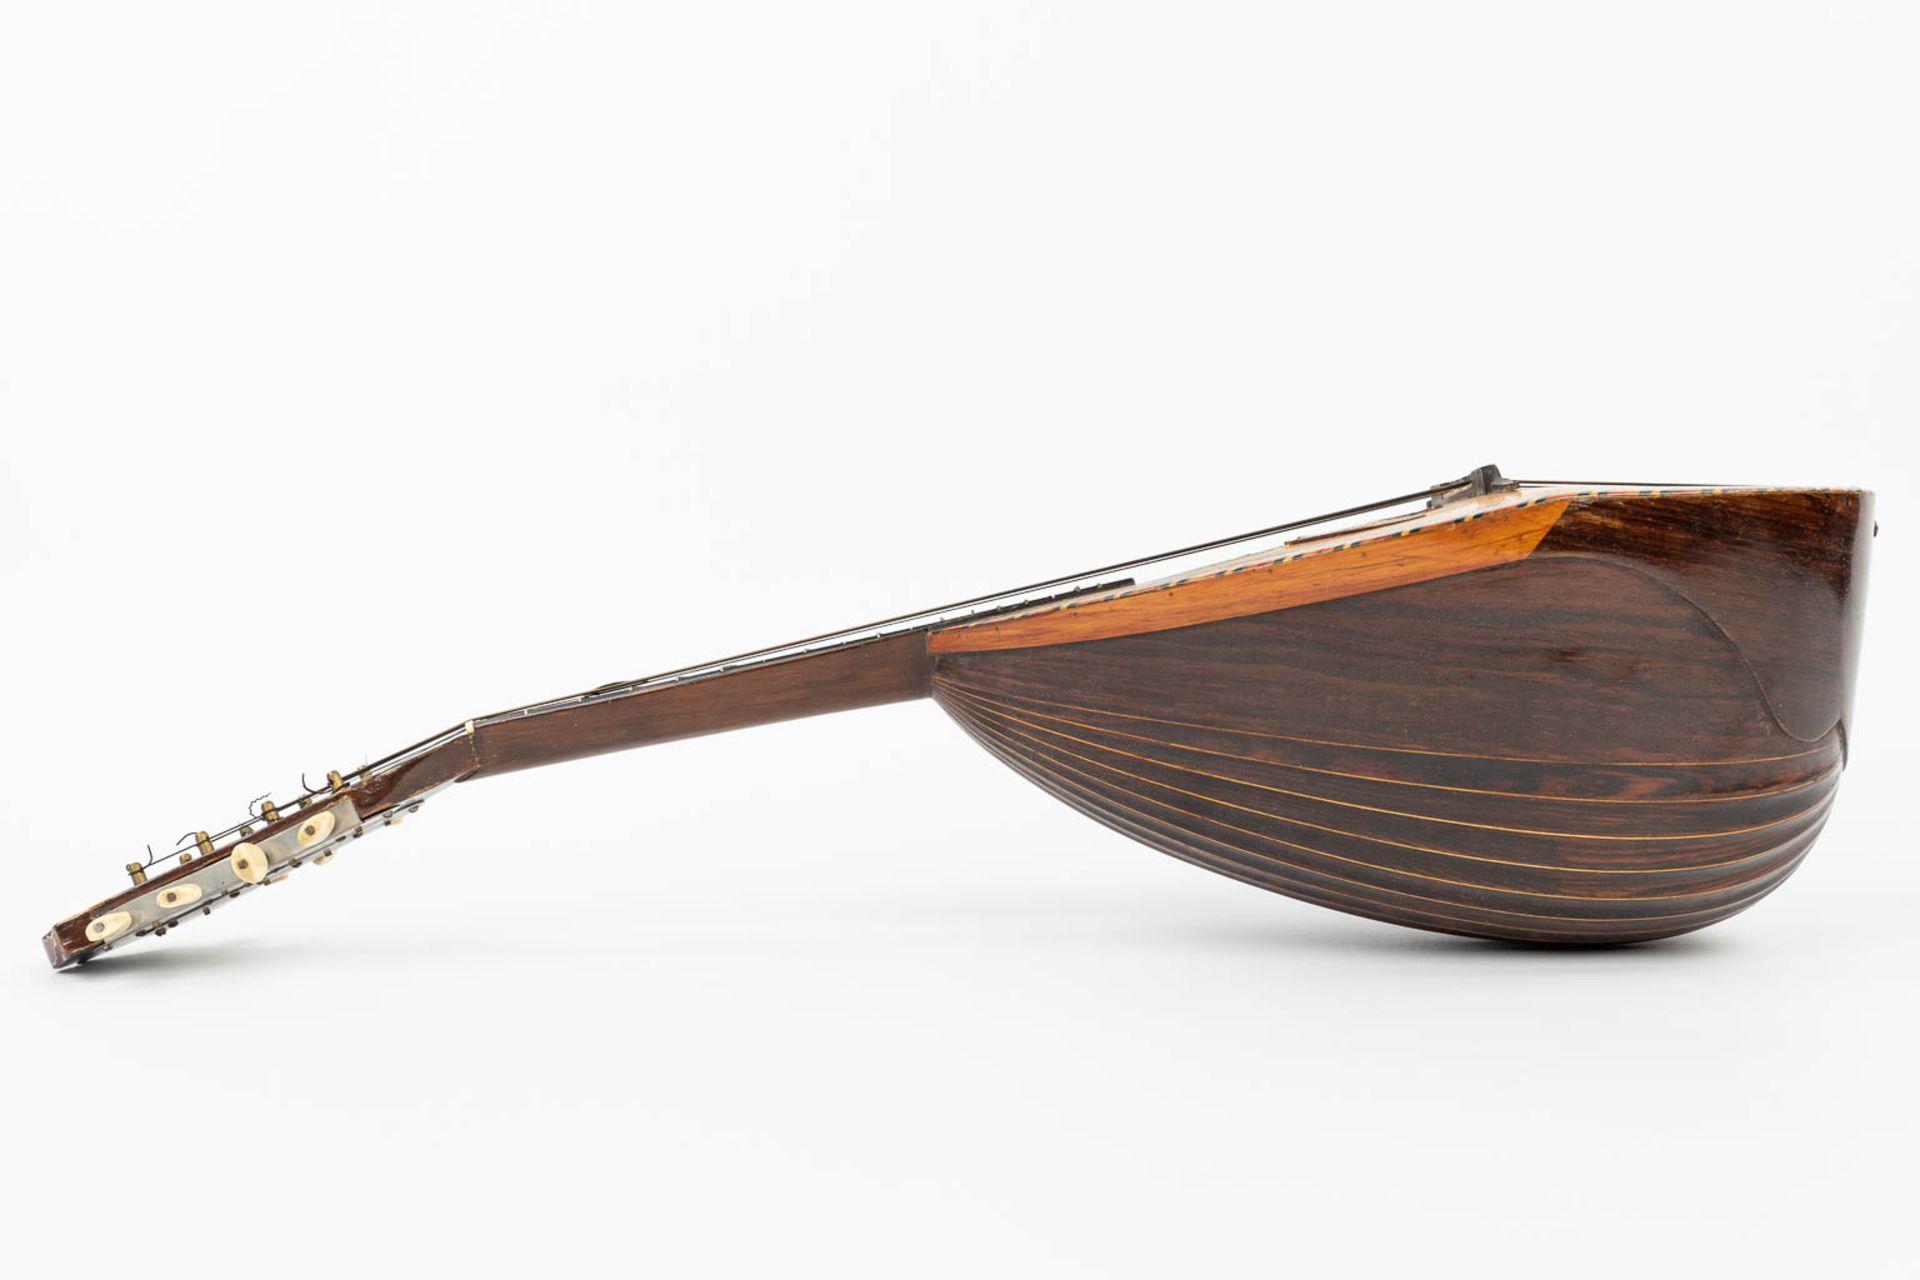 A collection of 3 musical instruments: 2 mandolines and a violin, after a model made by Stradivarius - Image 5 of 56